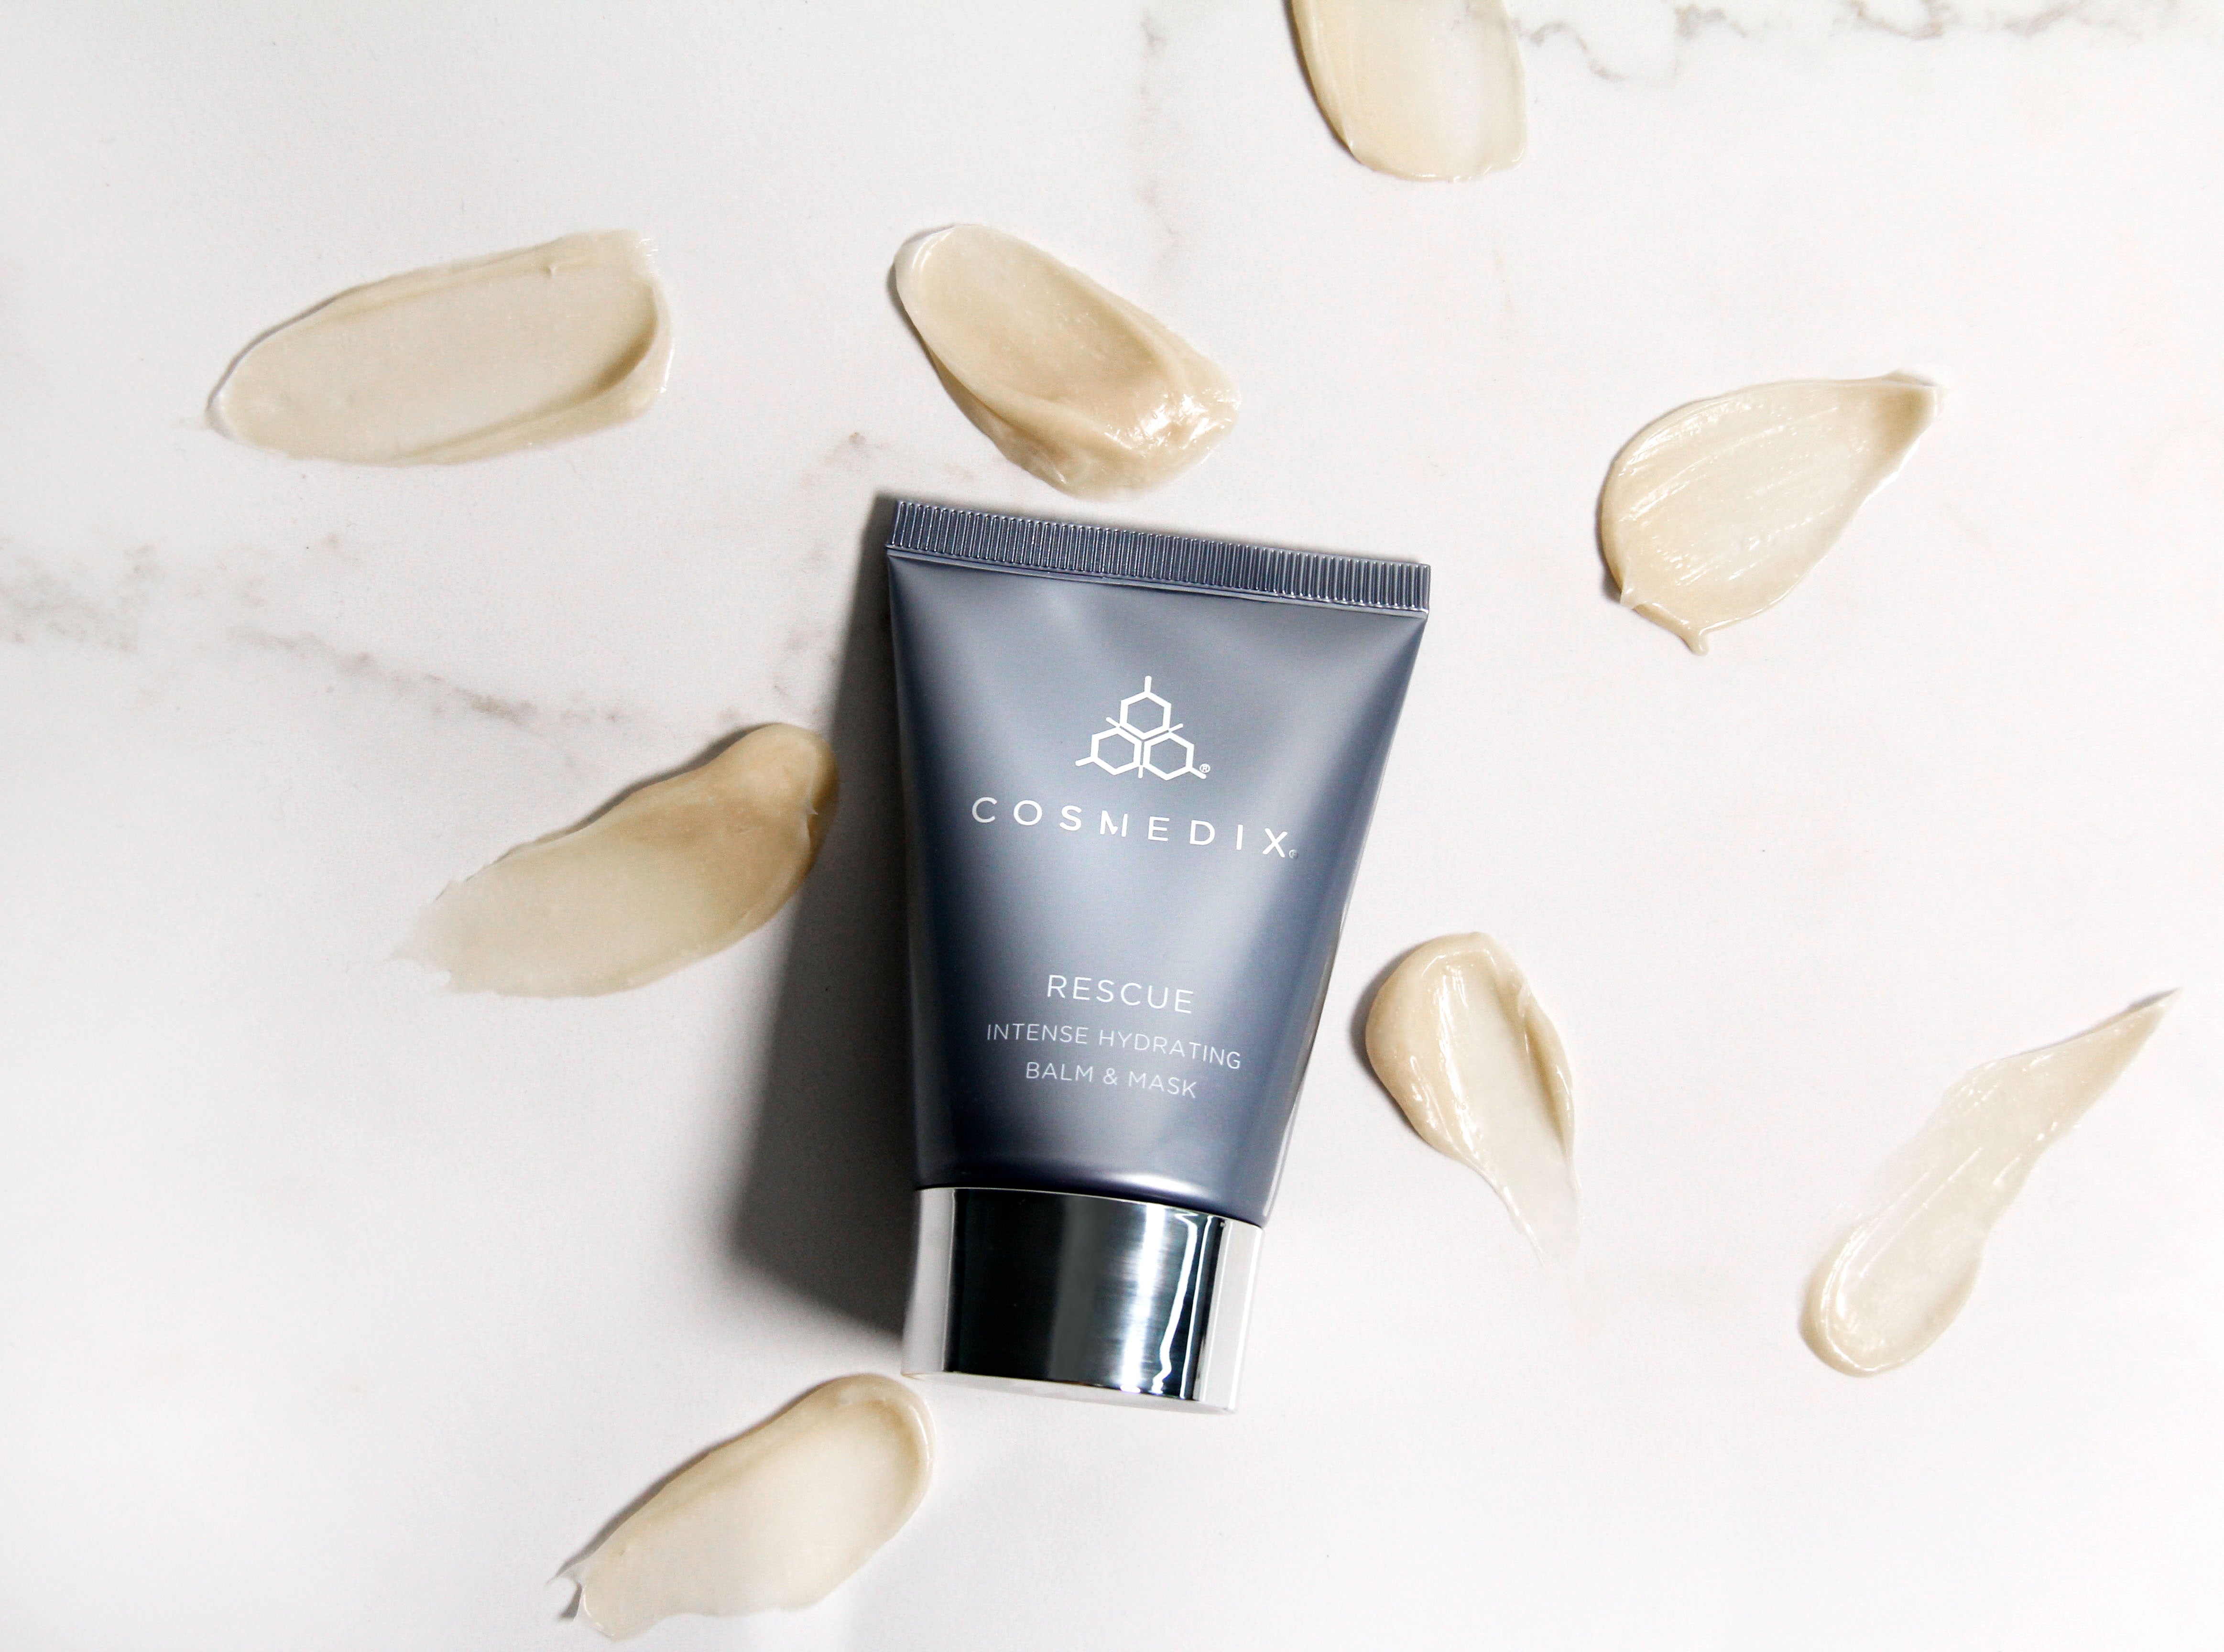 Rescue Intensely Hydrating Balm & Mask